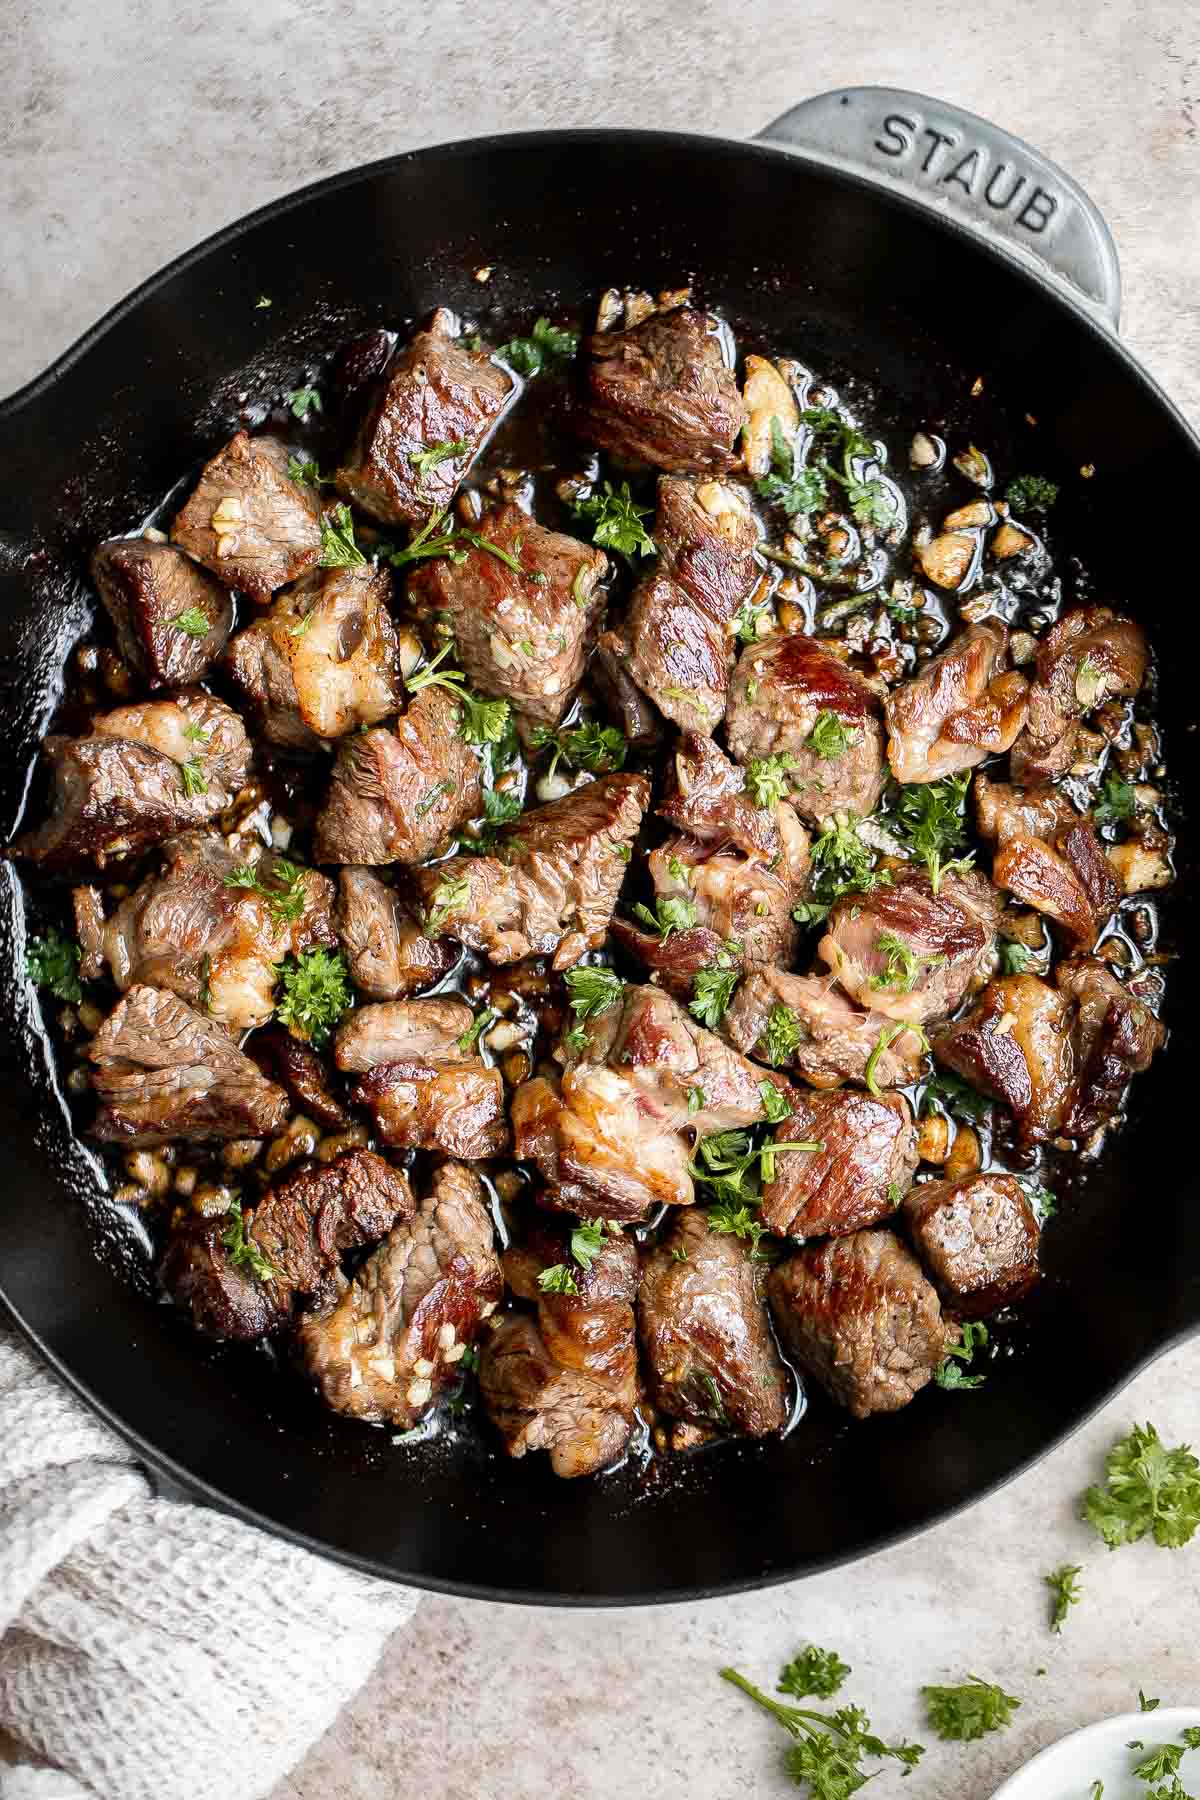 Garlic Butter Steak Bites are tender, juicy, and flavorful. This quick and easy appetizer or weeknight dinner takes just 15 minutes to make in one skillet. | aheadofthyme.com